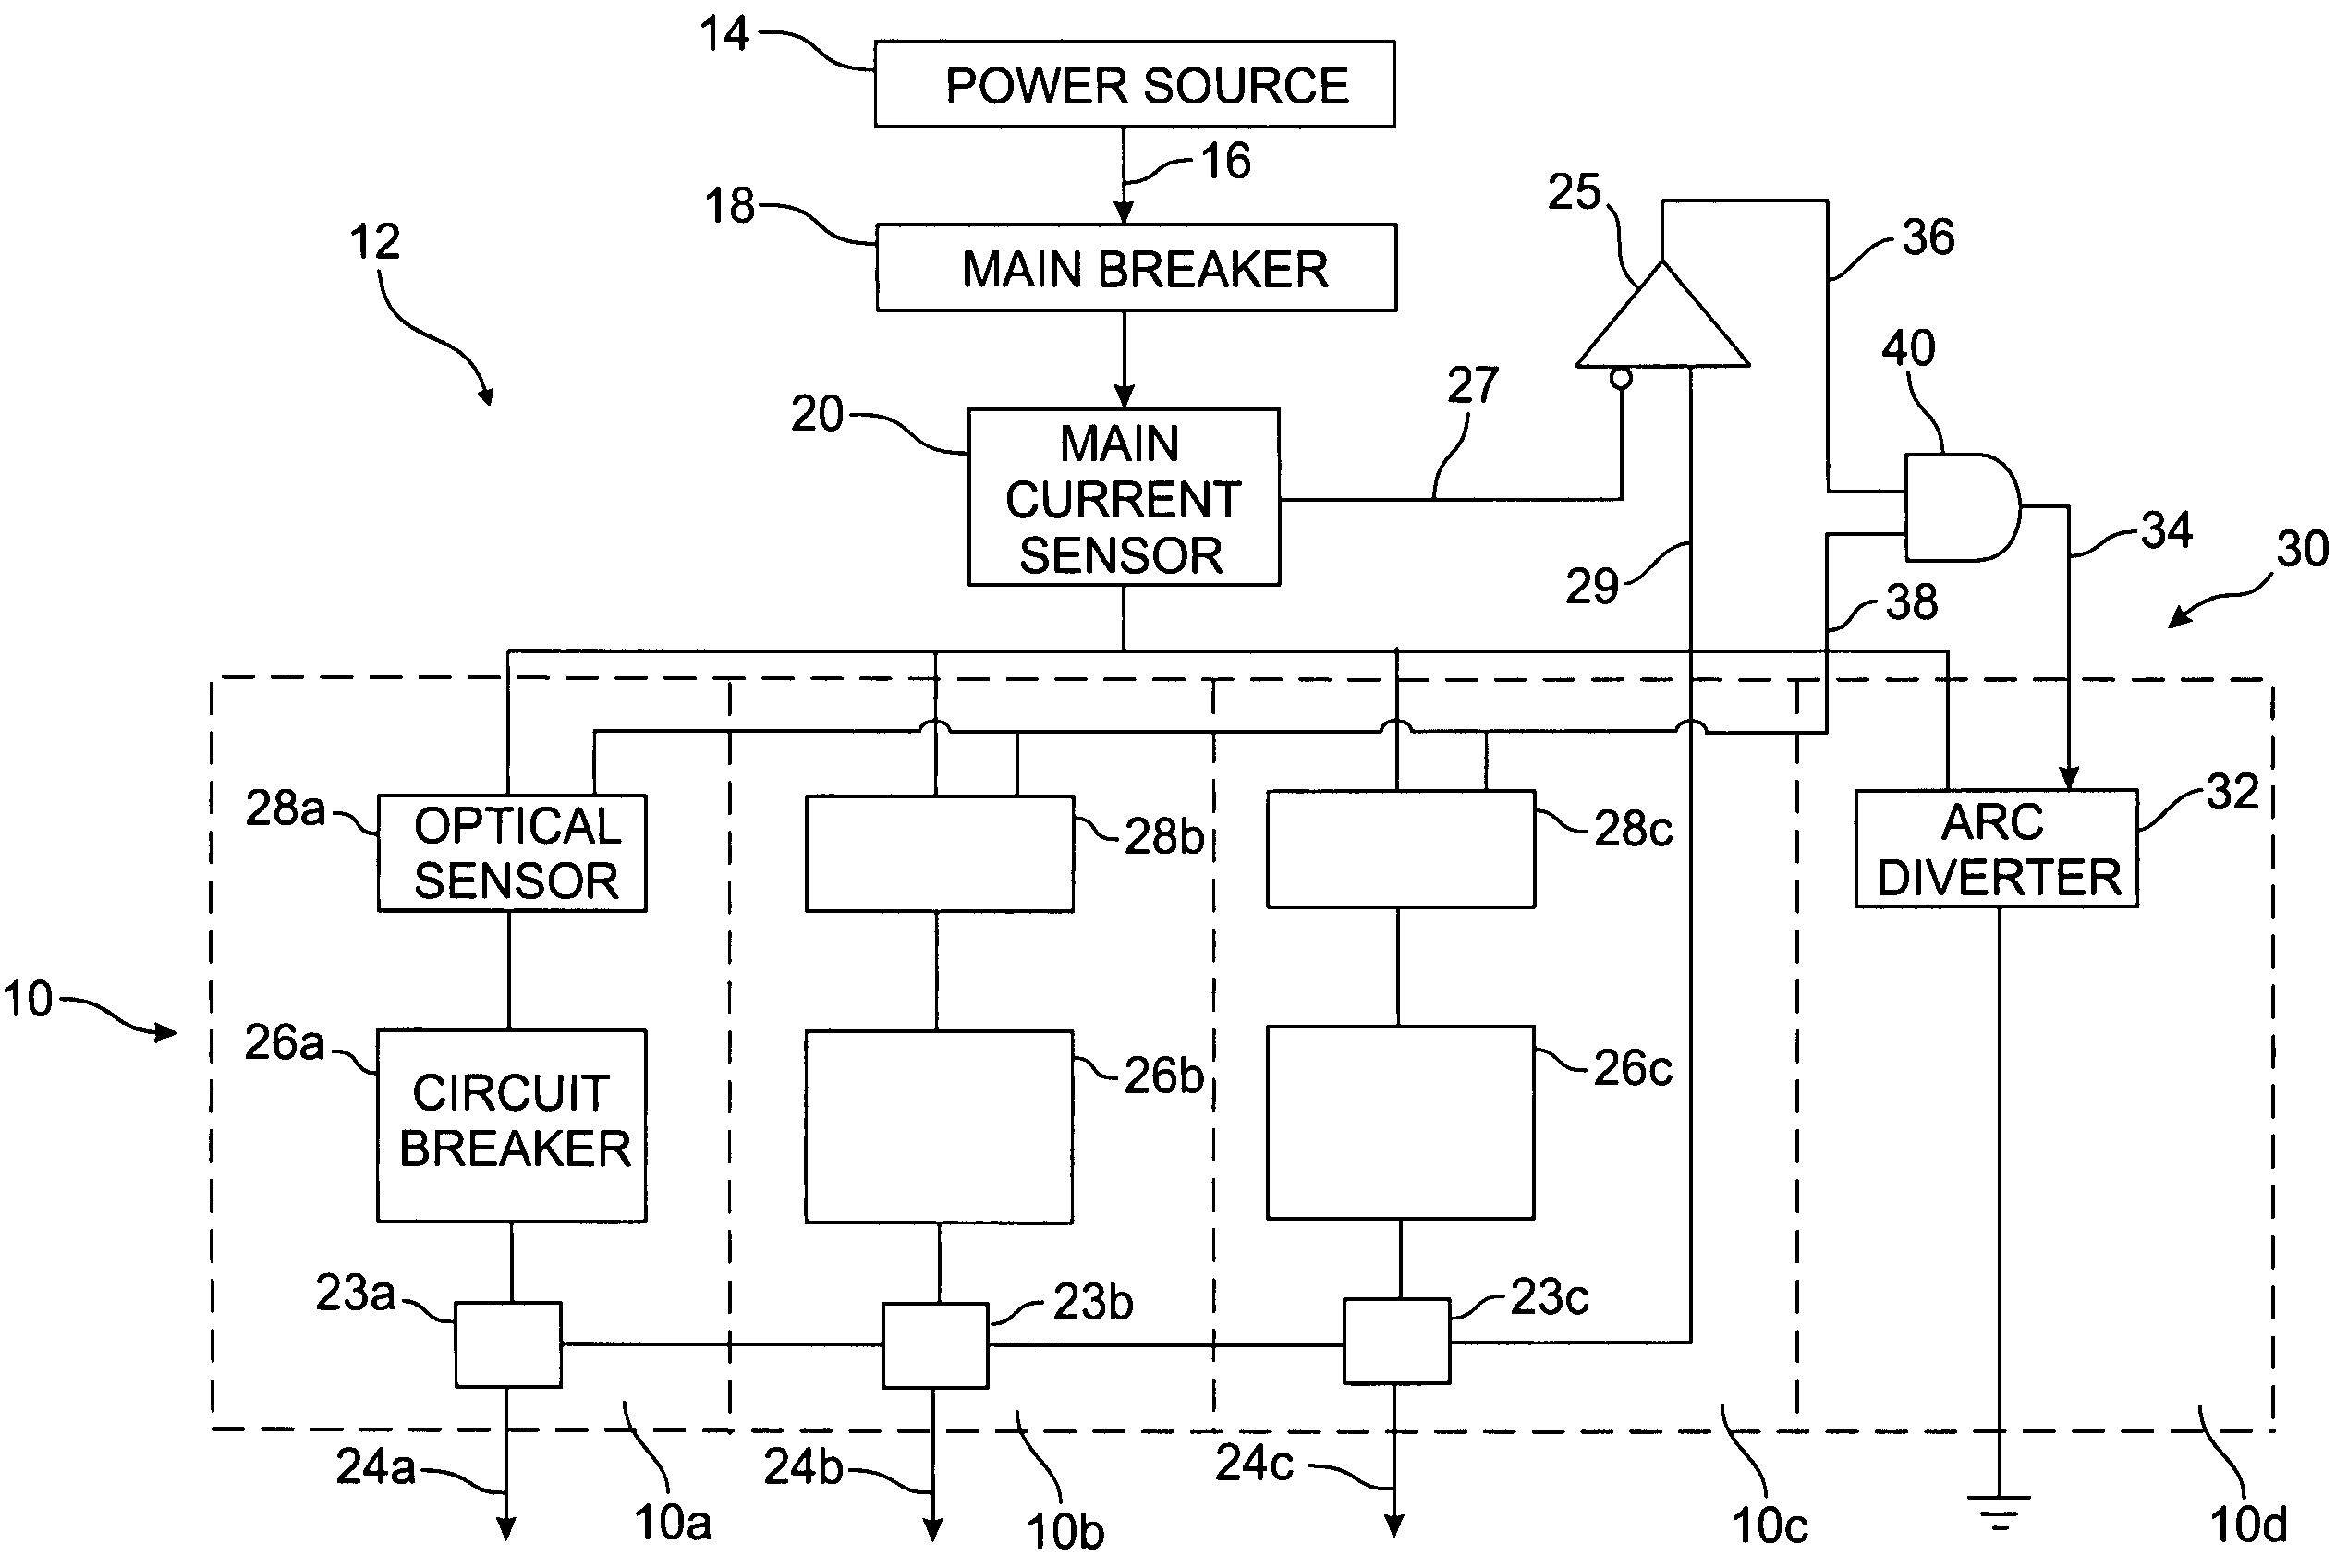 Arcing fault protection system for an air arc switchgear enclosure